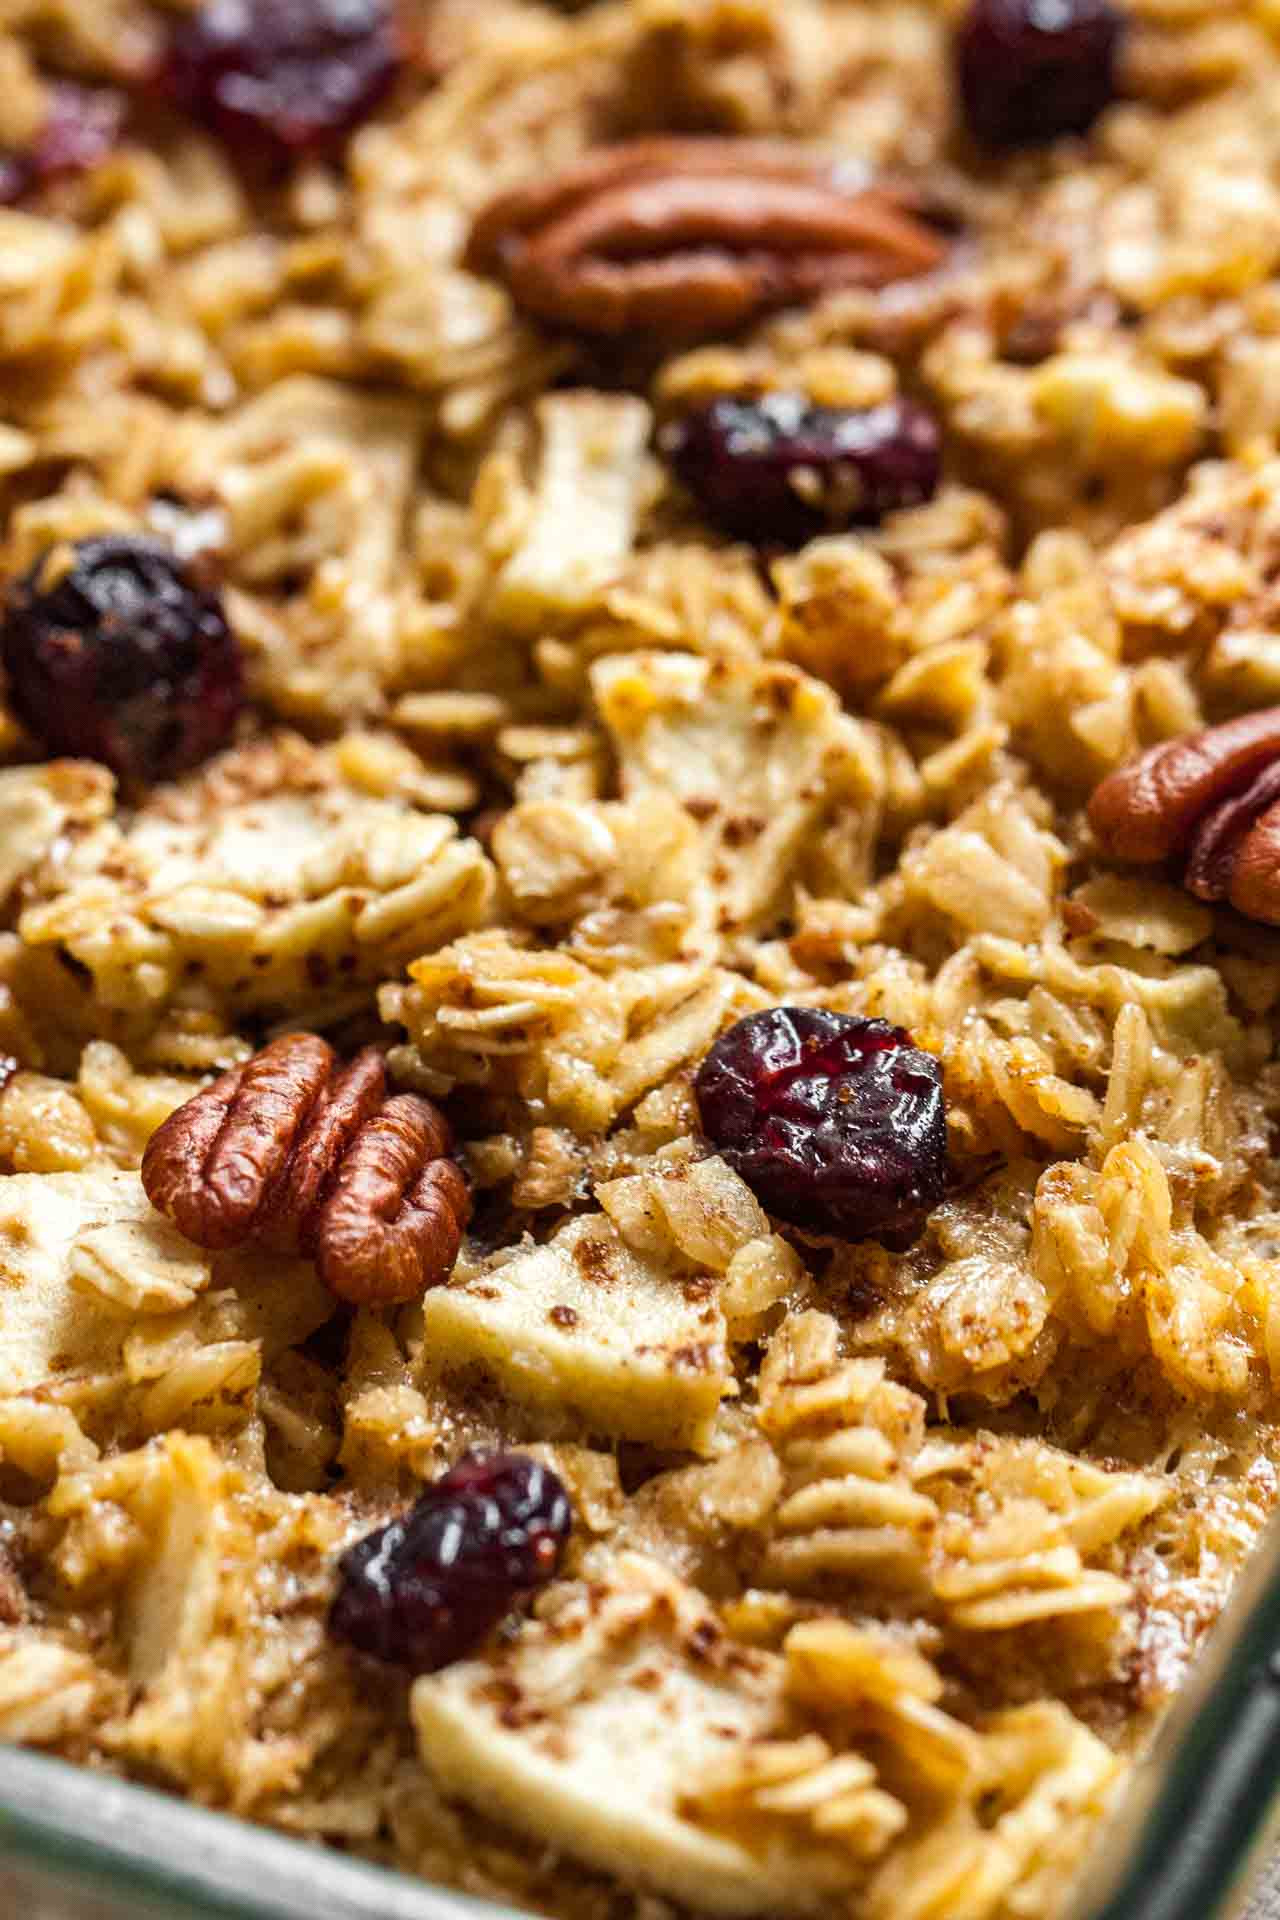 Oatmeal Breakfast Recipes
 Easy Baked Oatmeal Recipe with Apples Cranberries and Pecans